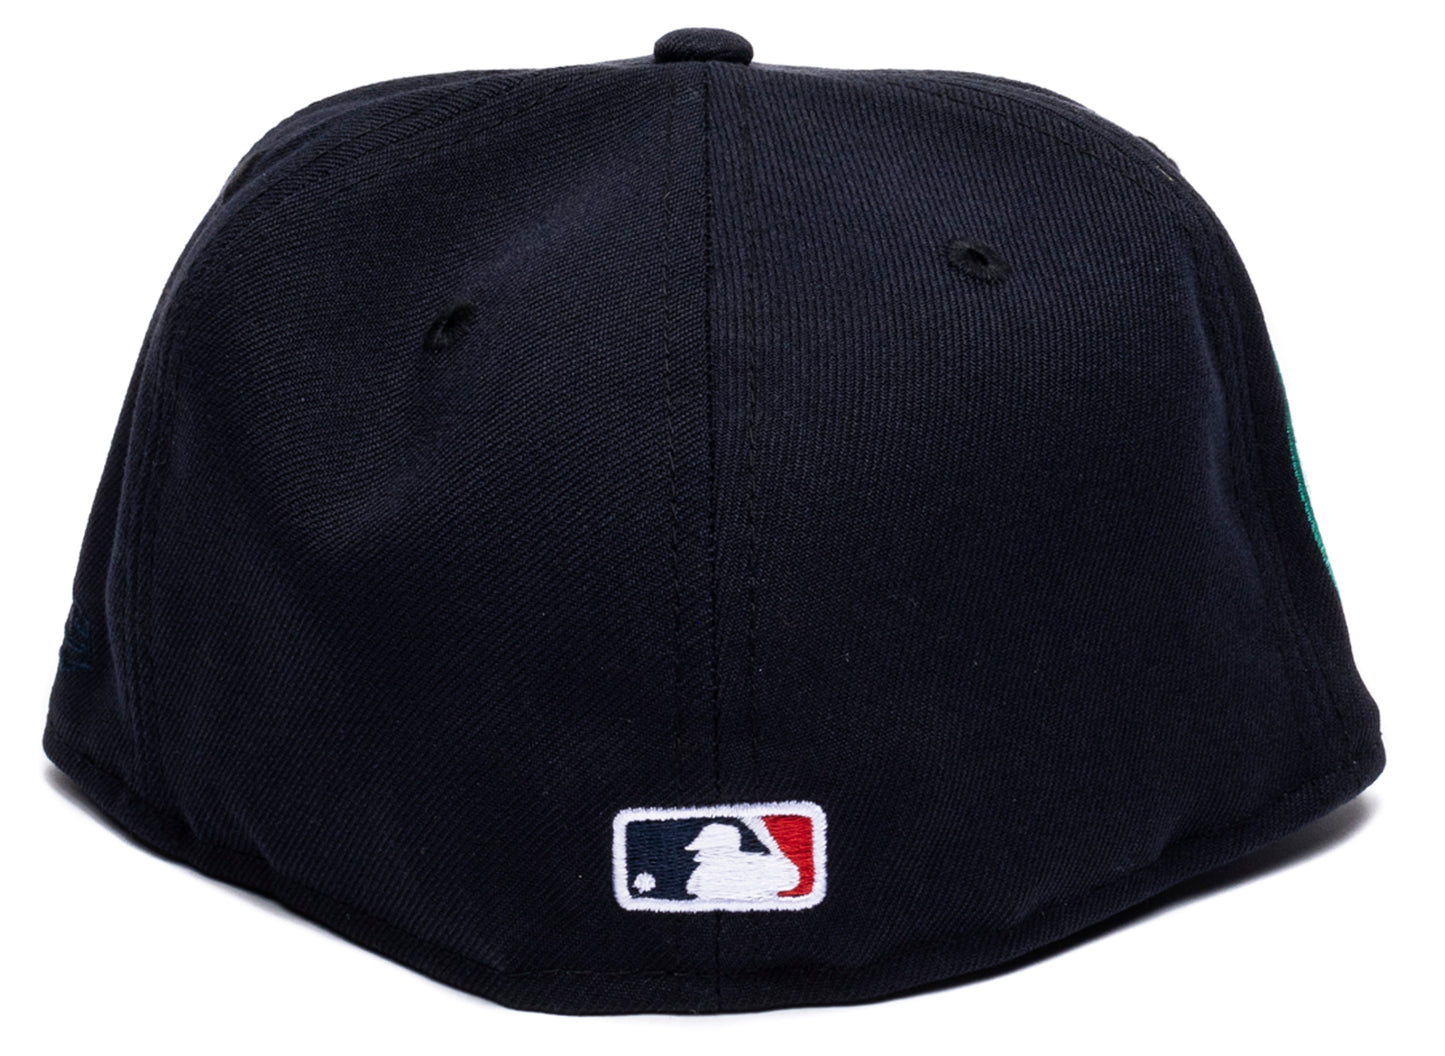 New Era Boston Red Sox Fenway Park 5950 Fitted Hat xld